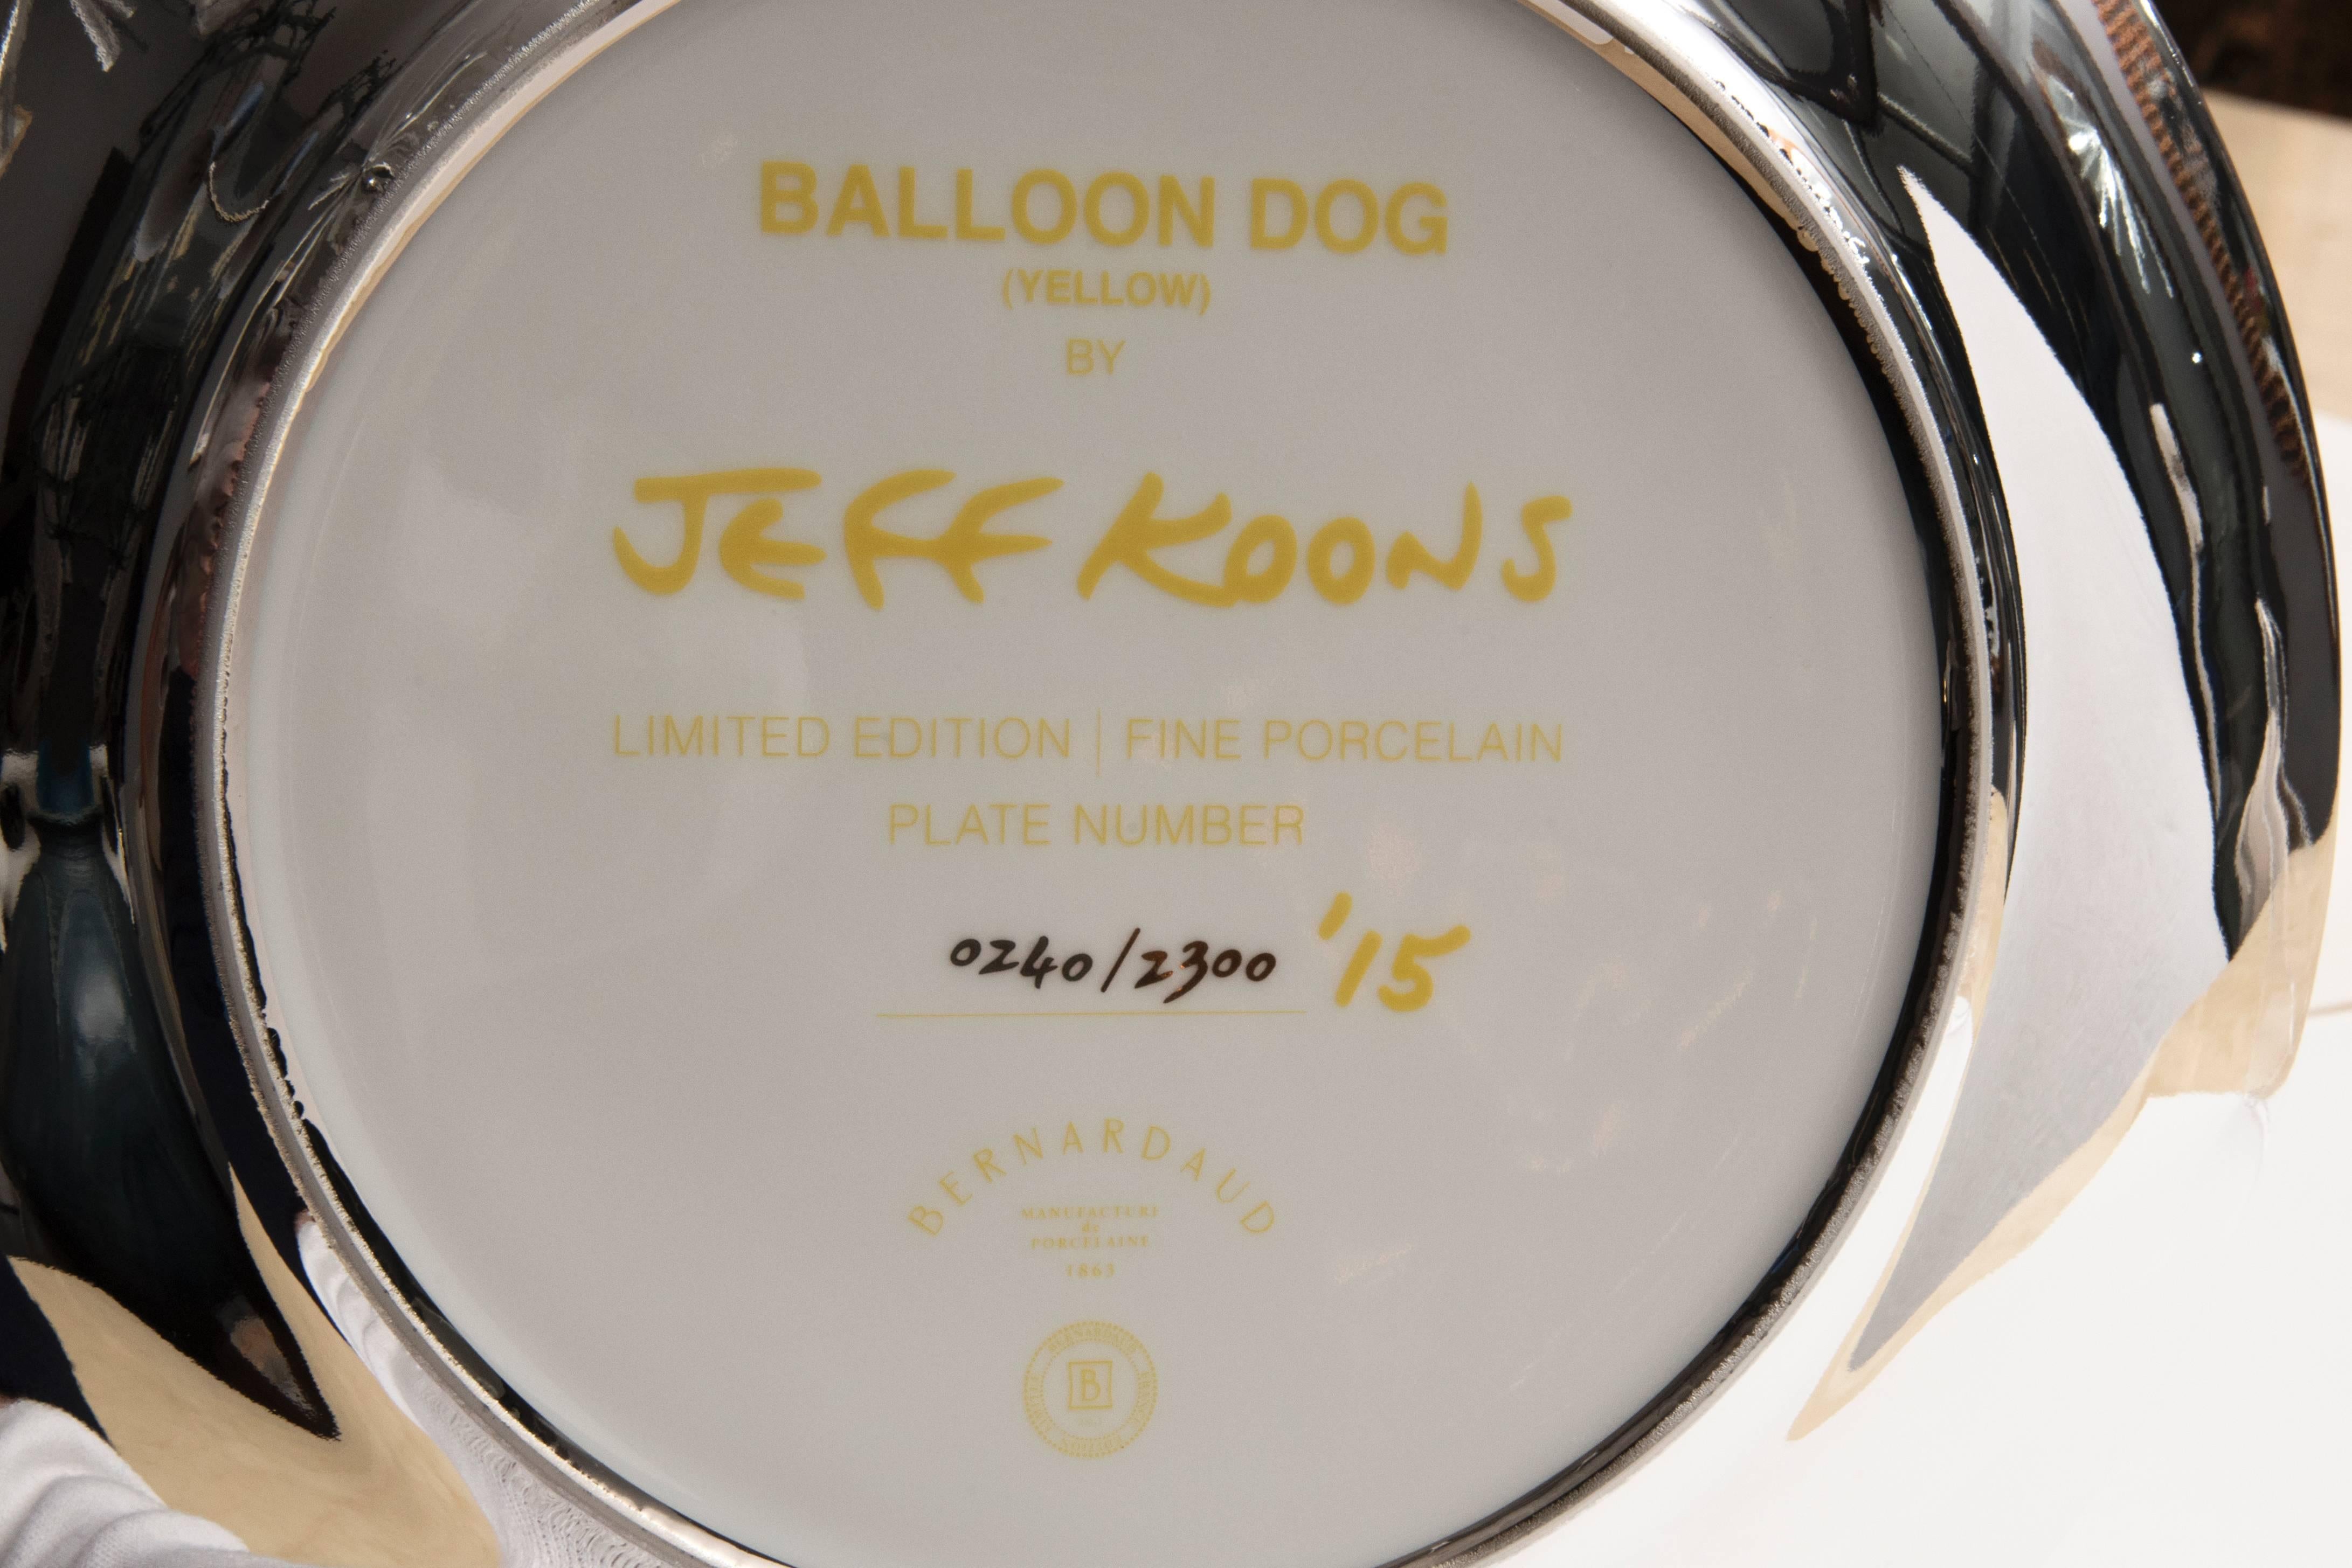 Jeff Koons balloon dog (Yellow), 2015, 
porcelain,
signed and numbered on the back: 240/2300,
Bernardaud edition,
2015, USA.
Measures: Height 27 cm, diameter 27 cm.
Certificate of authenticity, original box.